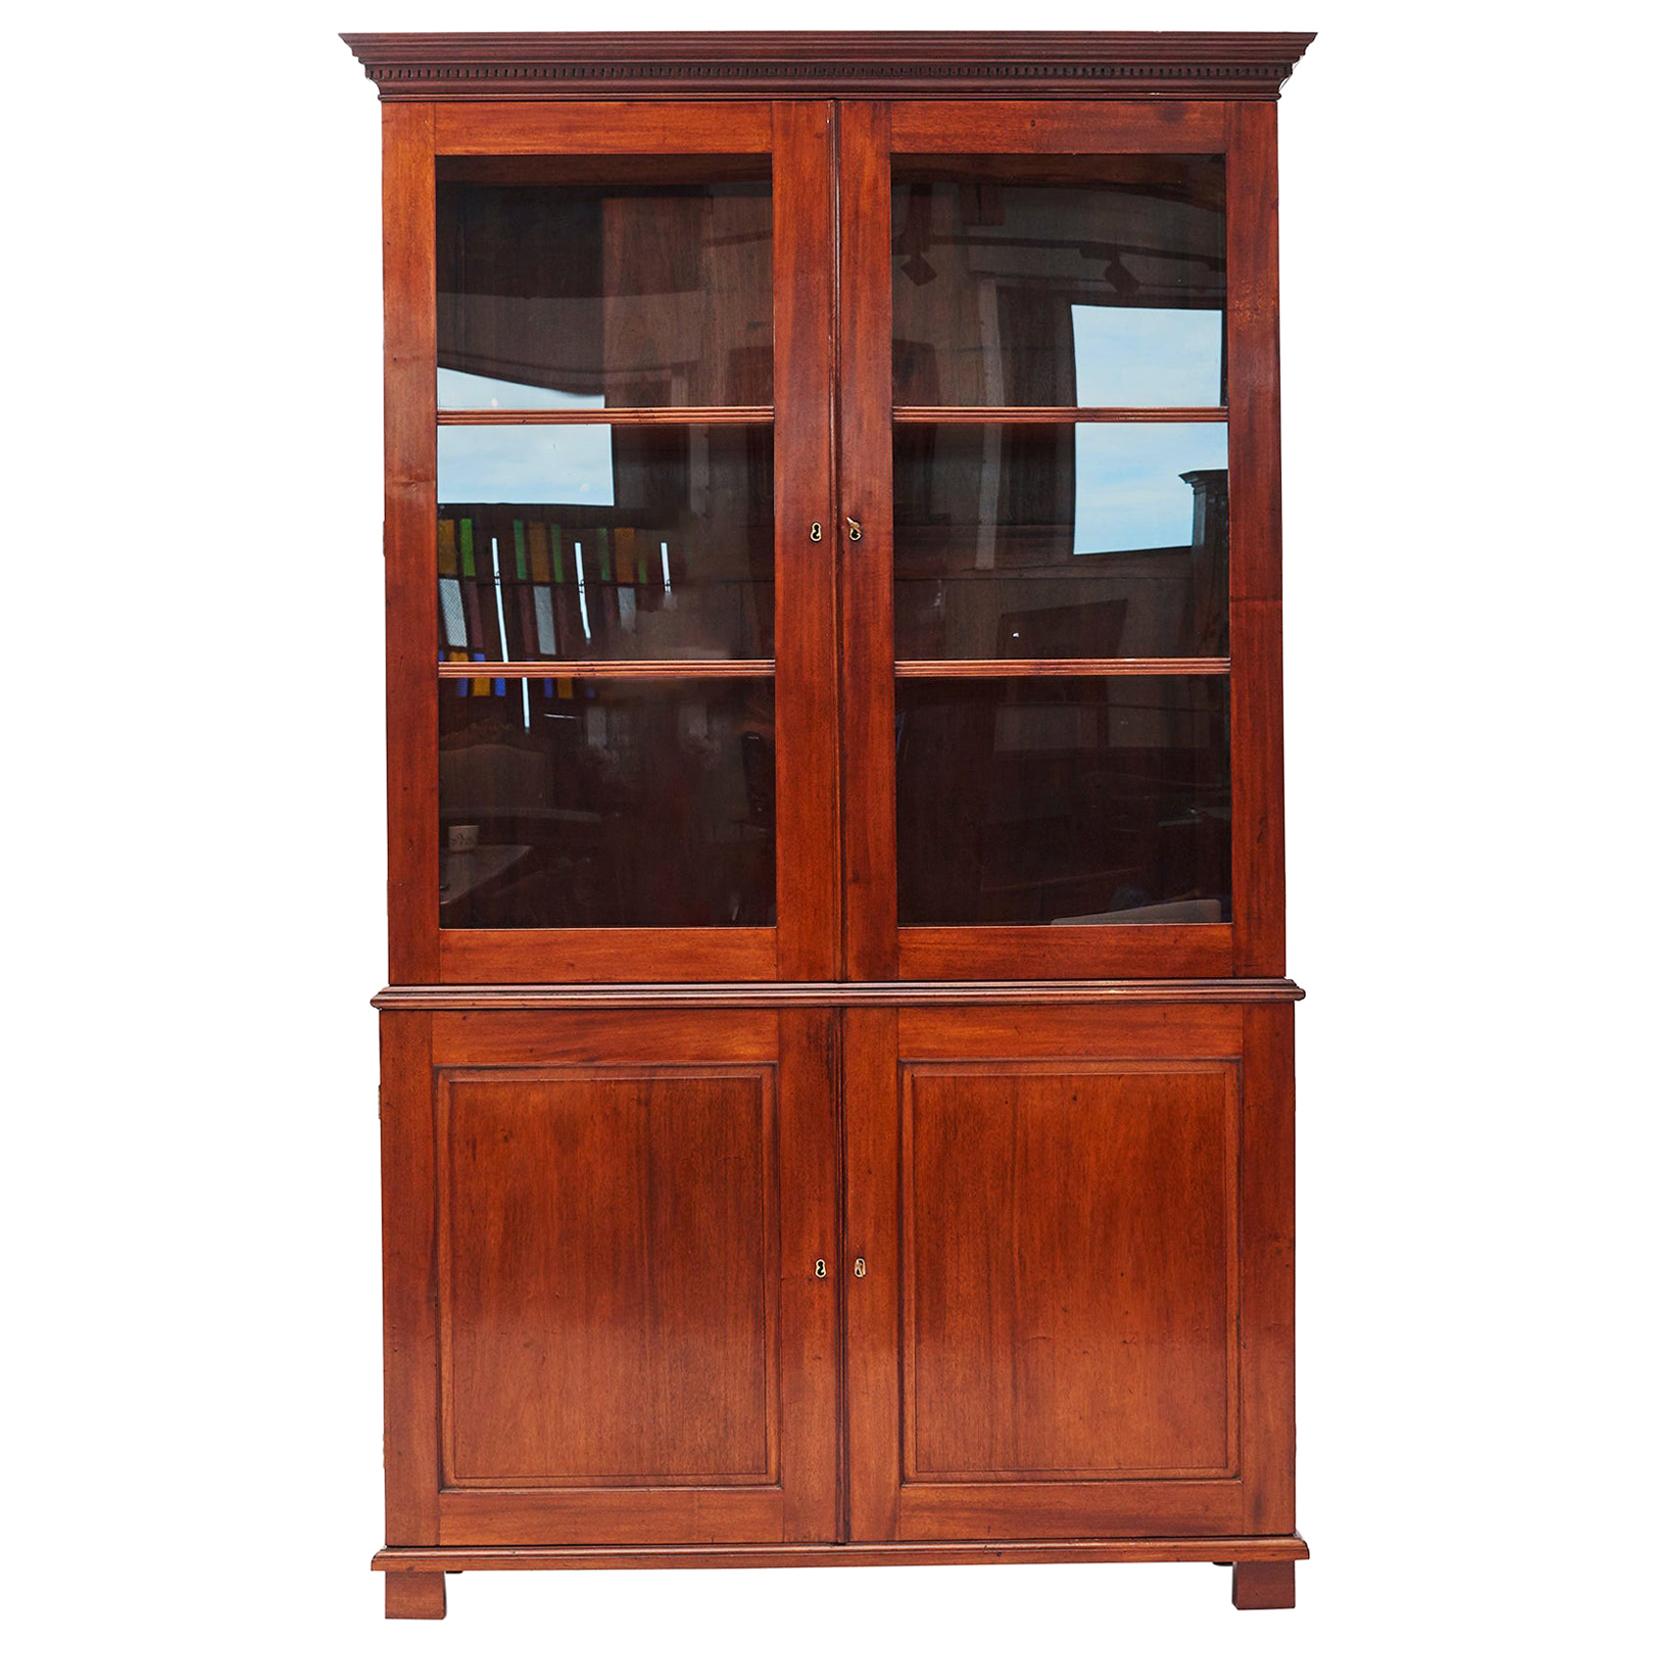 Mahogany Empire Cabinet with Glass Doors from Danish, West Indies